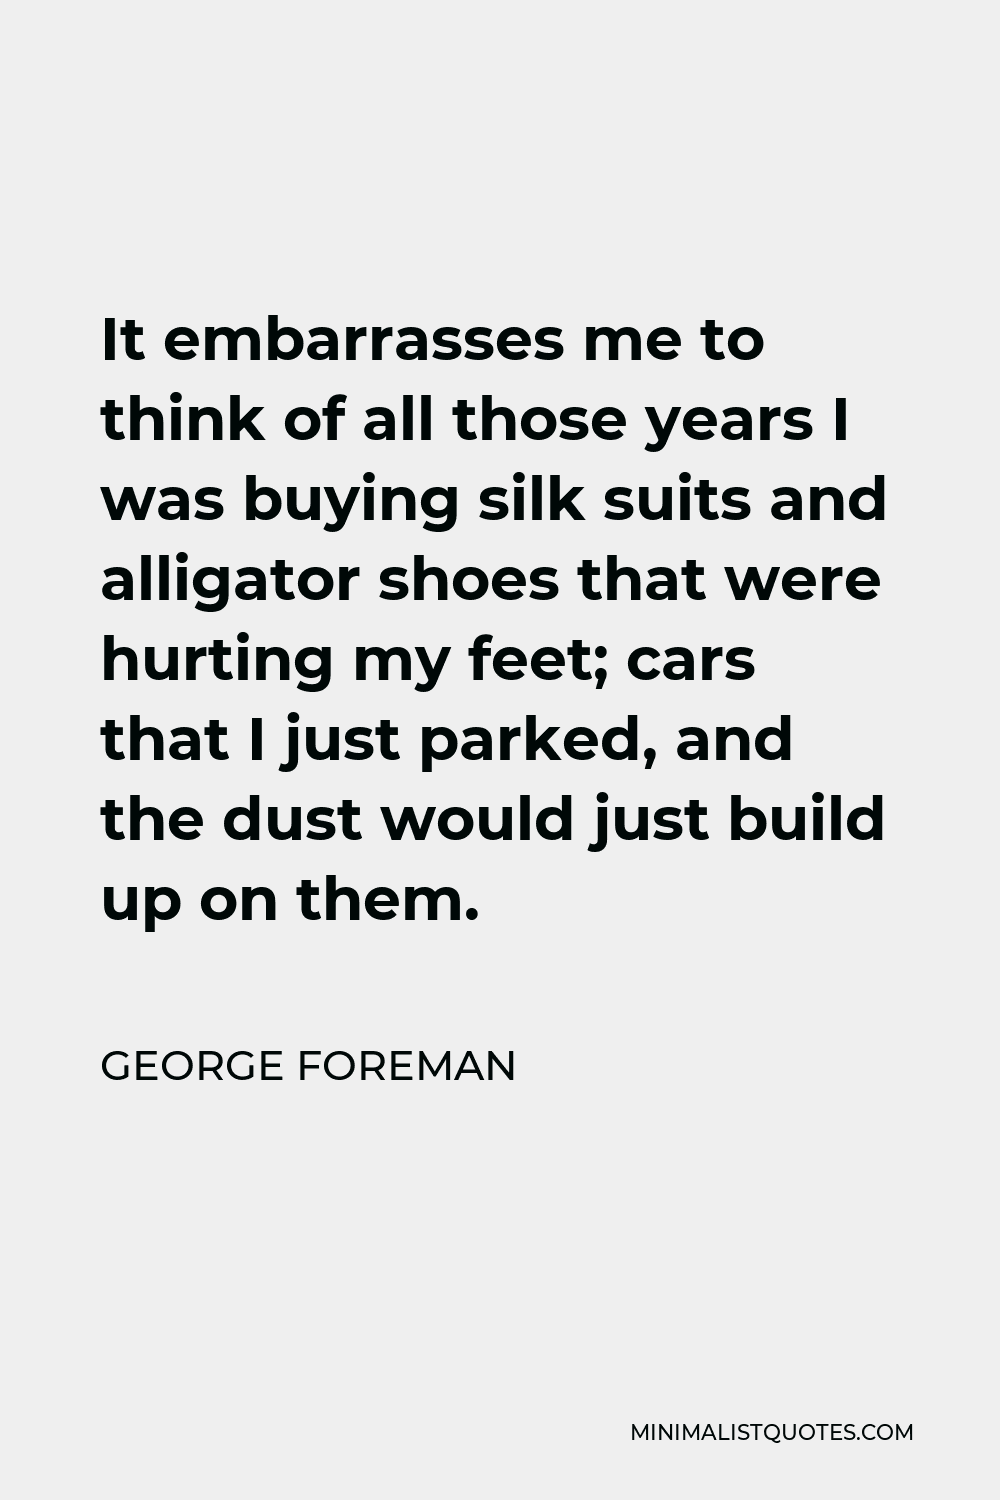 George Foreman Quote - It embarrasses me to think of all those years I was buying silk suits and alligator shoes that were hurting my feet; cars that I just parked, and the dust would just build up on them.